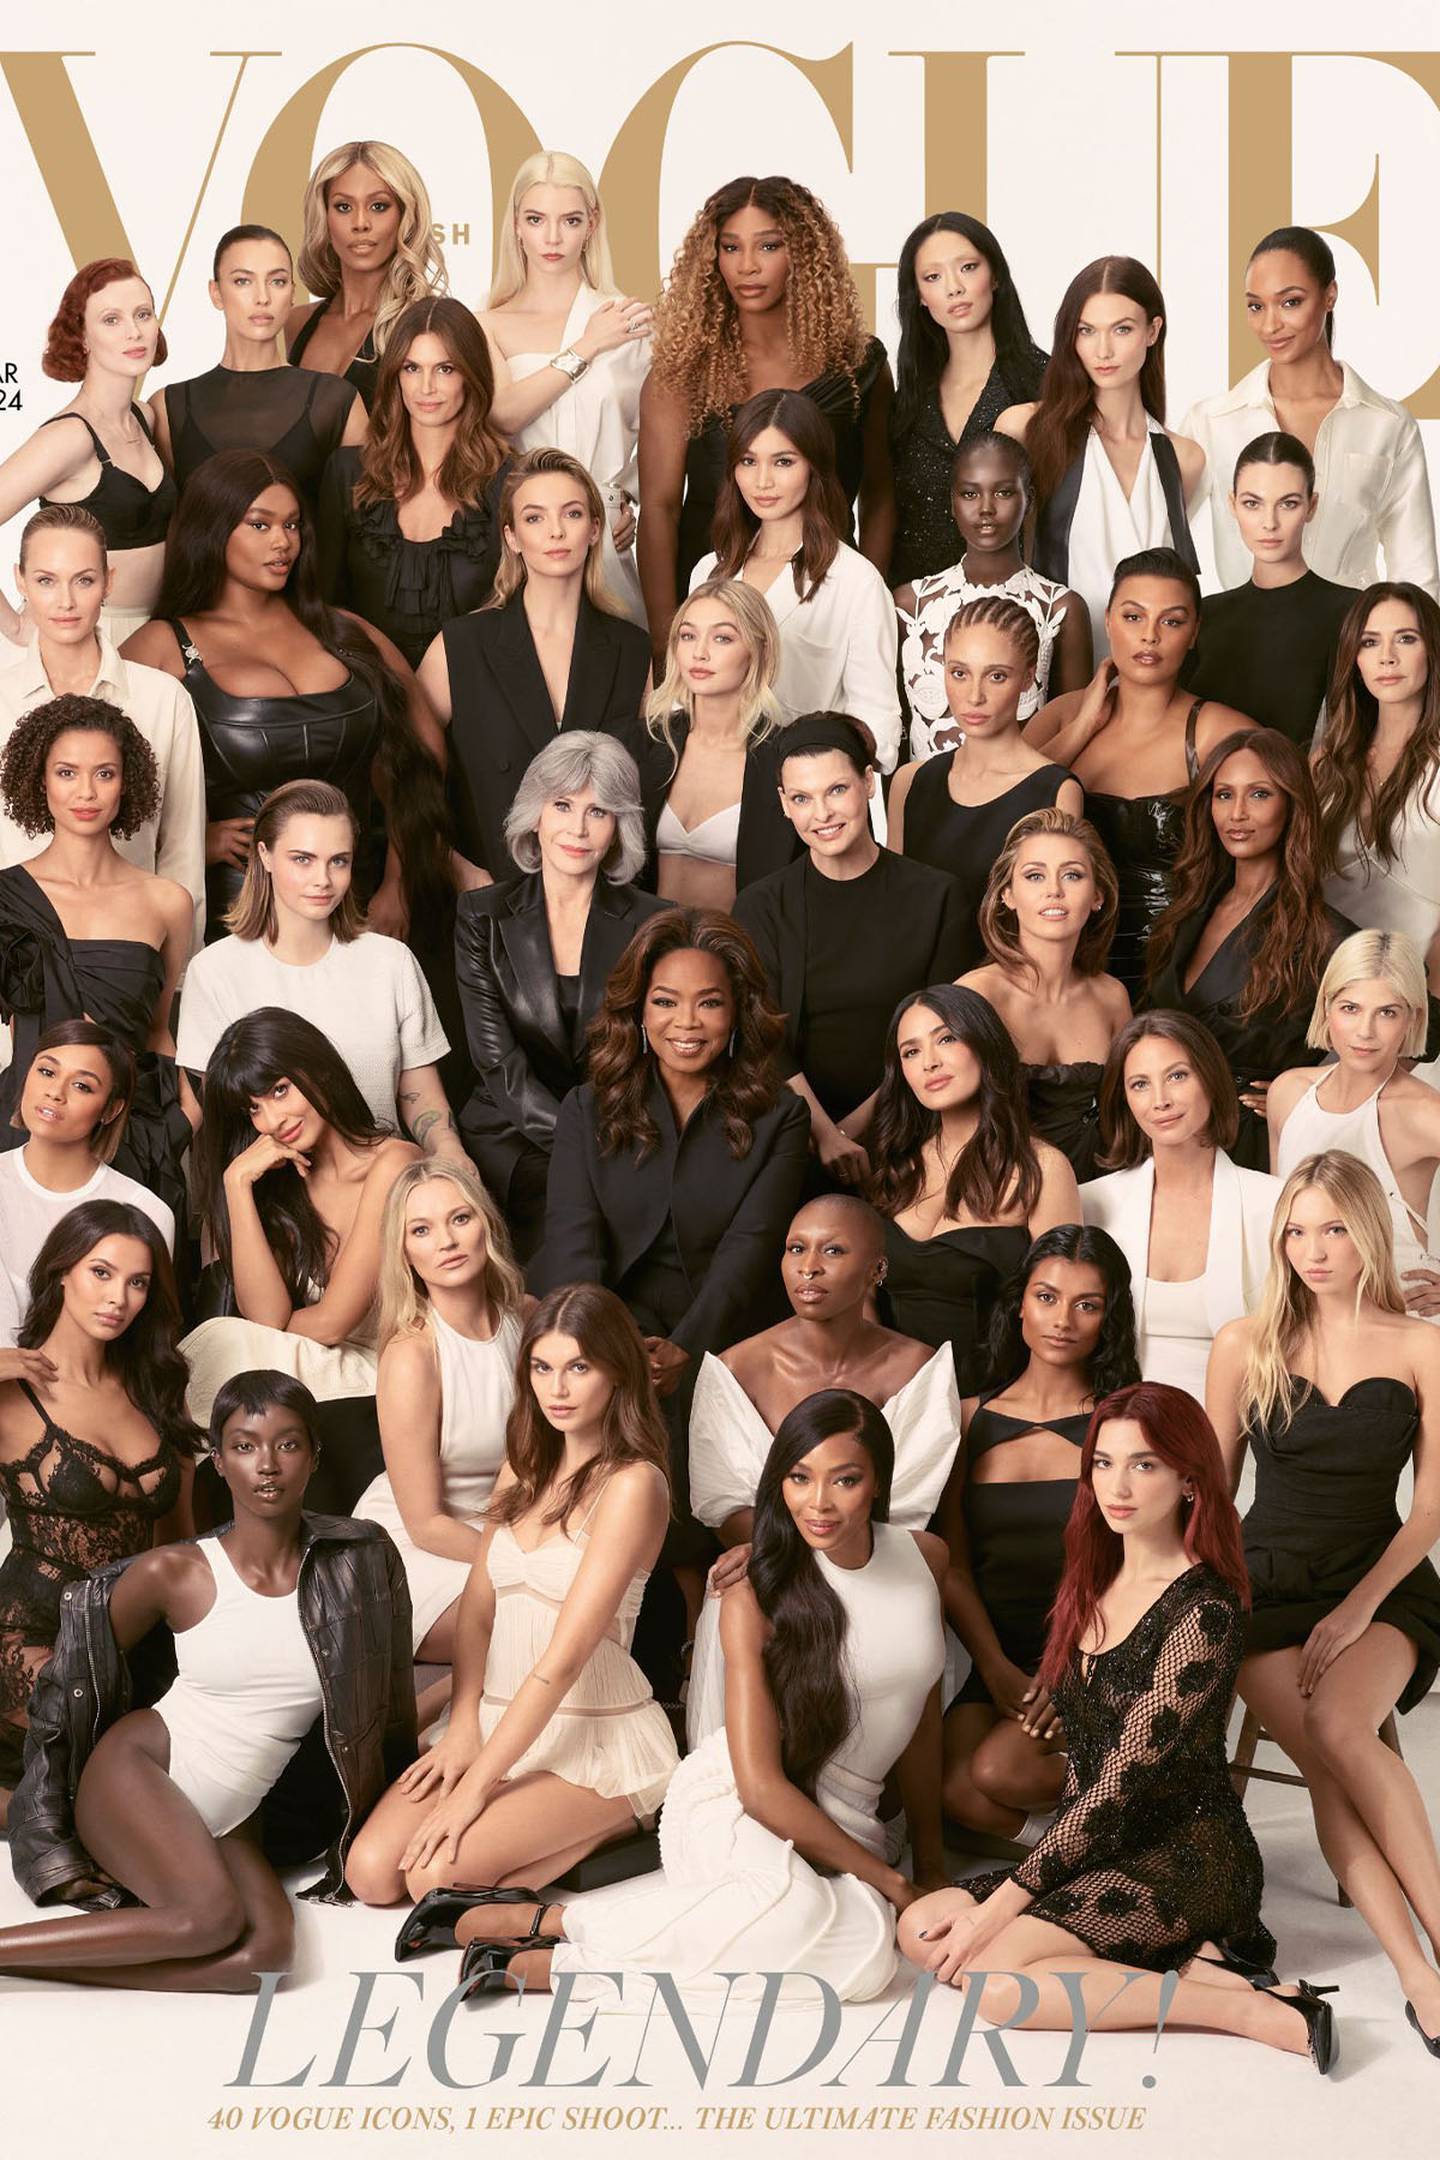 Image shows 40 women of varying ages and ethnicities gathered before a white studio backdrop. All are dressed in black, white or a combination of the two, and are looking into the camera. The four women at the front are sitting on the floor, and the rest are behind, arranged in rows that increase in height, so that all 40 are visible. Above their heads, the Vogue logo in gold letters. The cover line reads: “Legendary! 40 Vogue icons, one epic shoot... the ultimate fashion issue.”